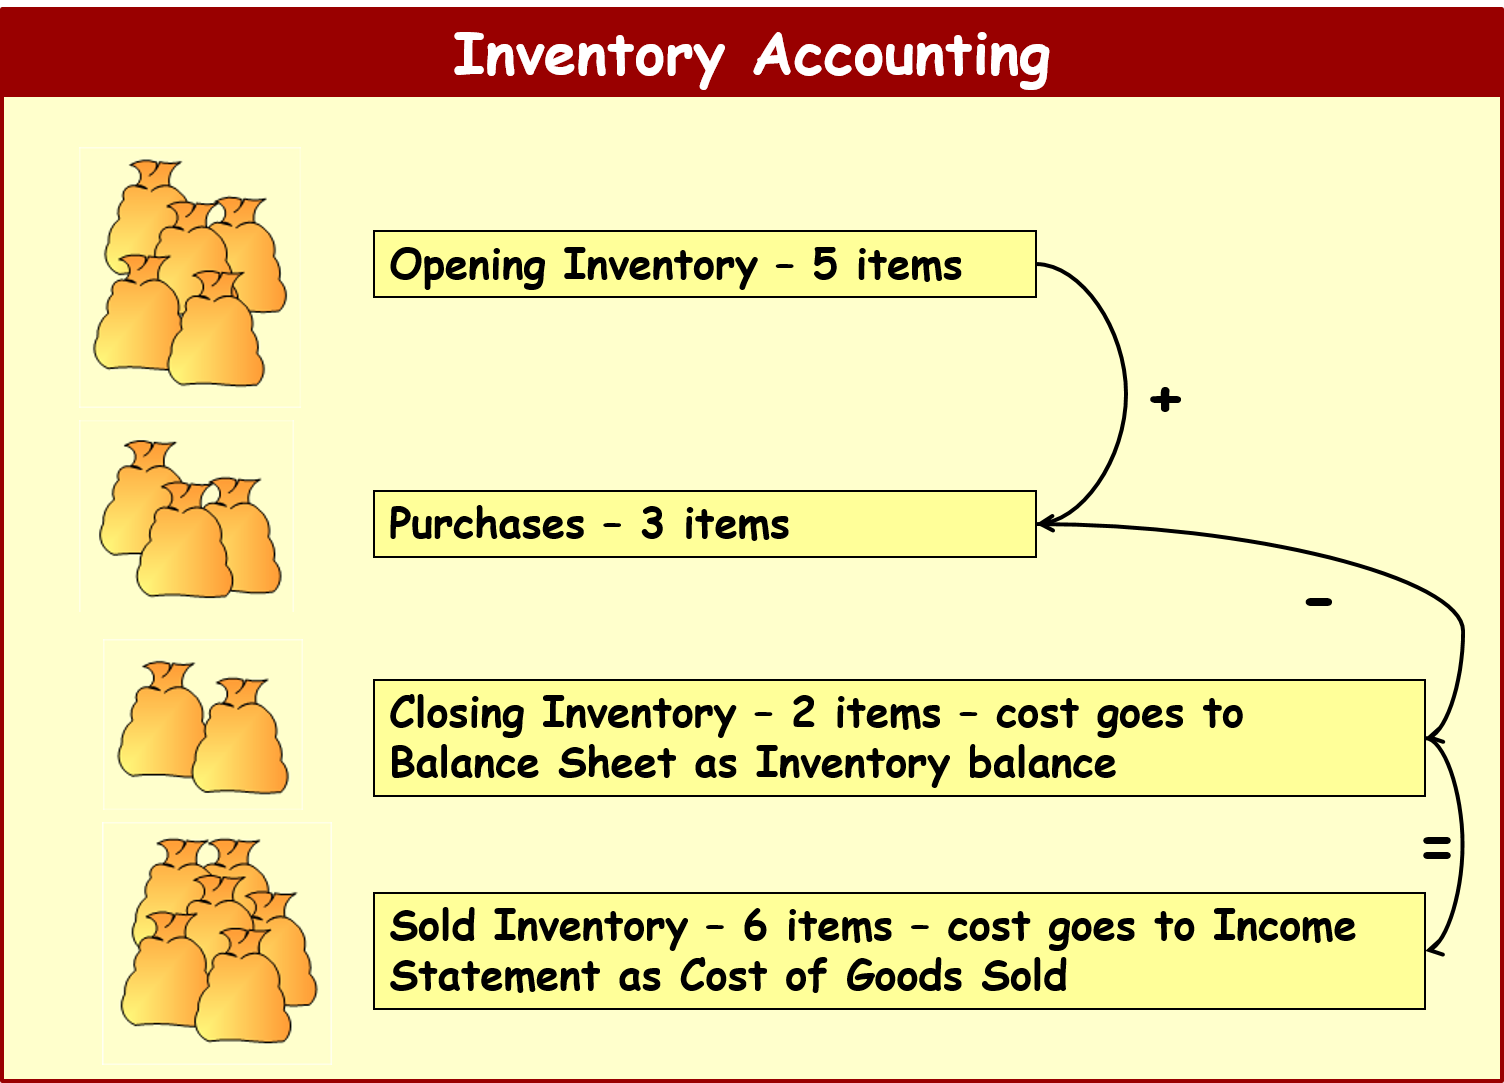 stale inventory meaning